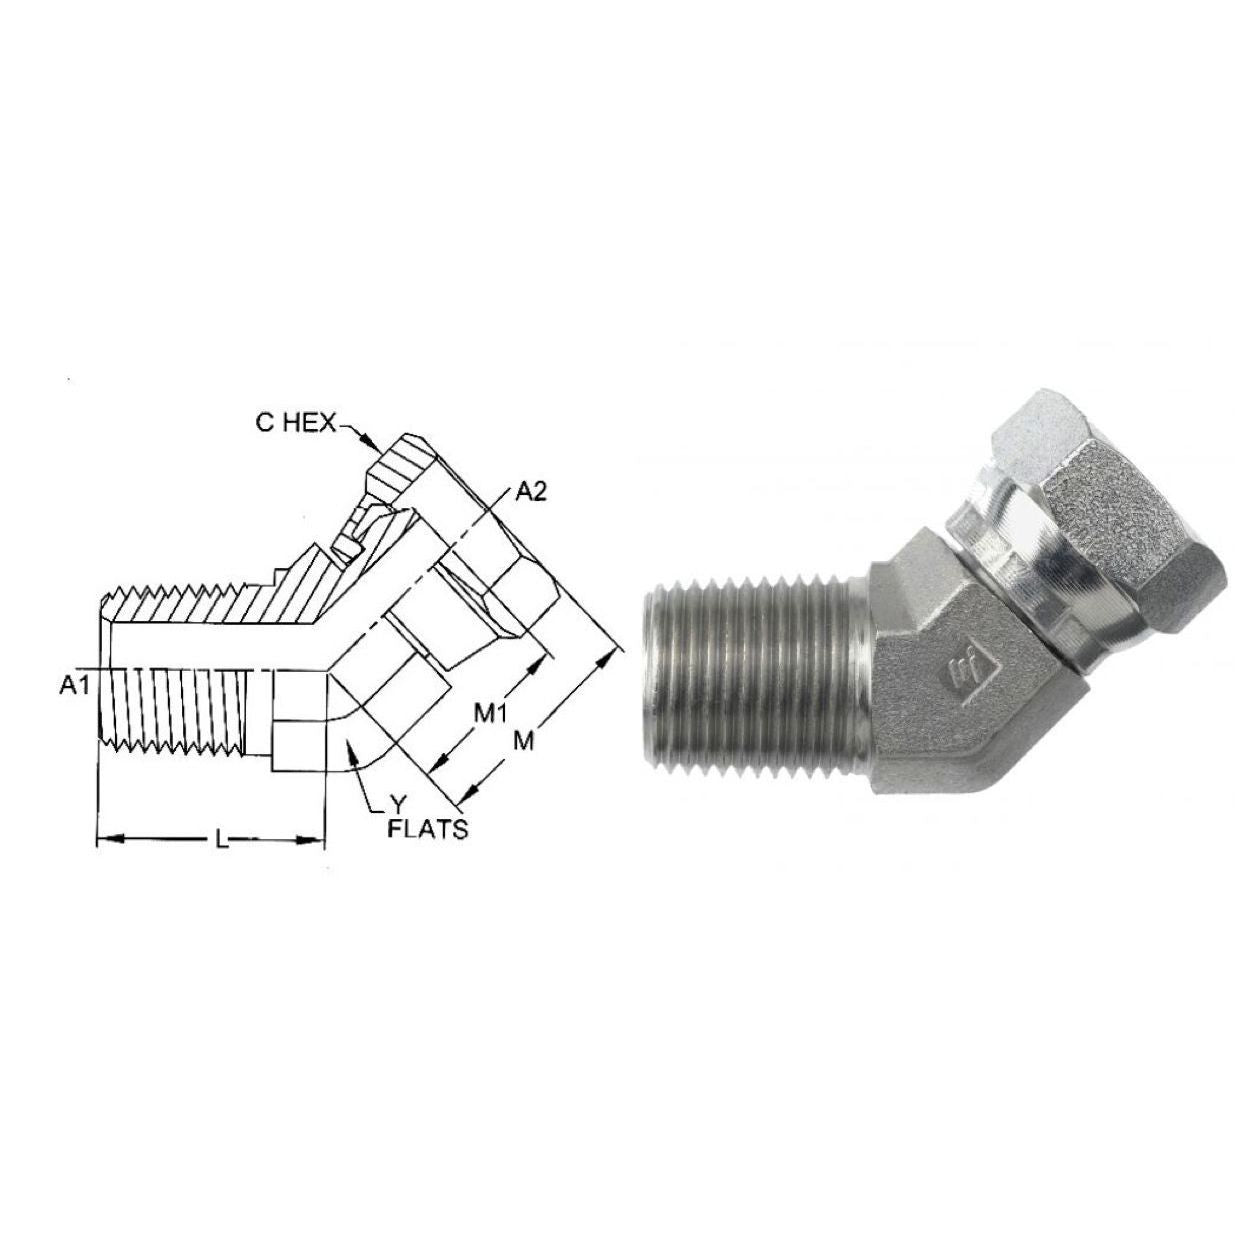 1503-04-04-SS : OneHydraulics 45-Degree Elbow, 0.25 (1/4) Male NPT x 0.25 (1/4) Female NPT Swivel, Stainless Steel, 6000psi